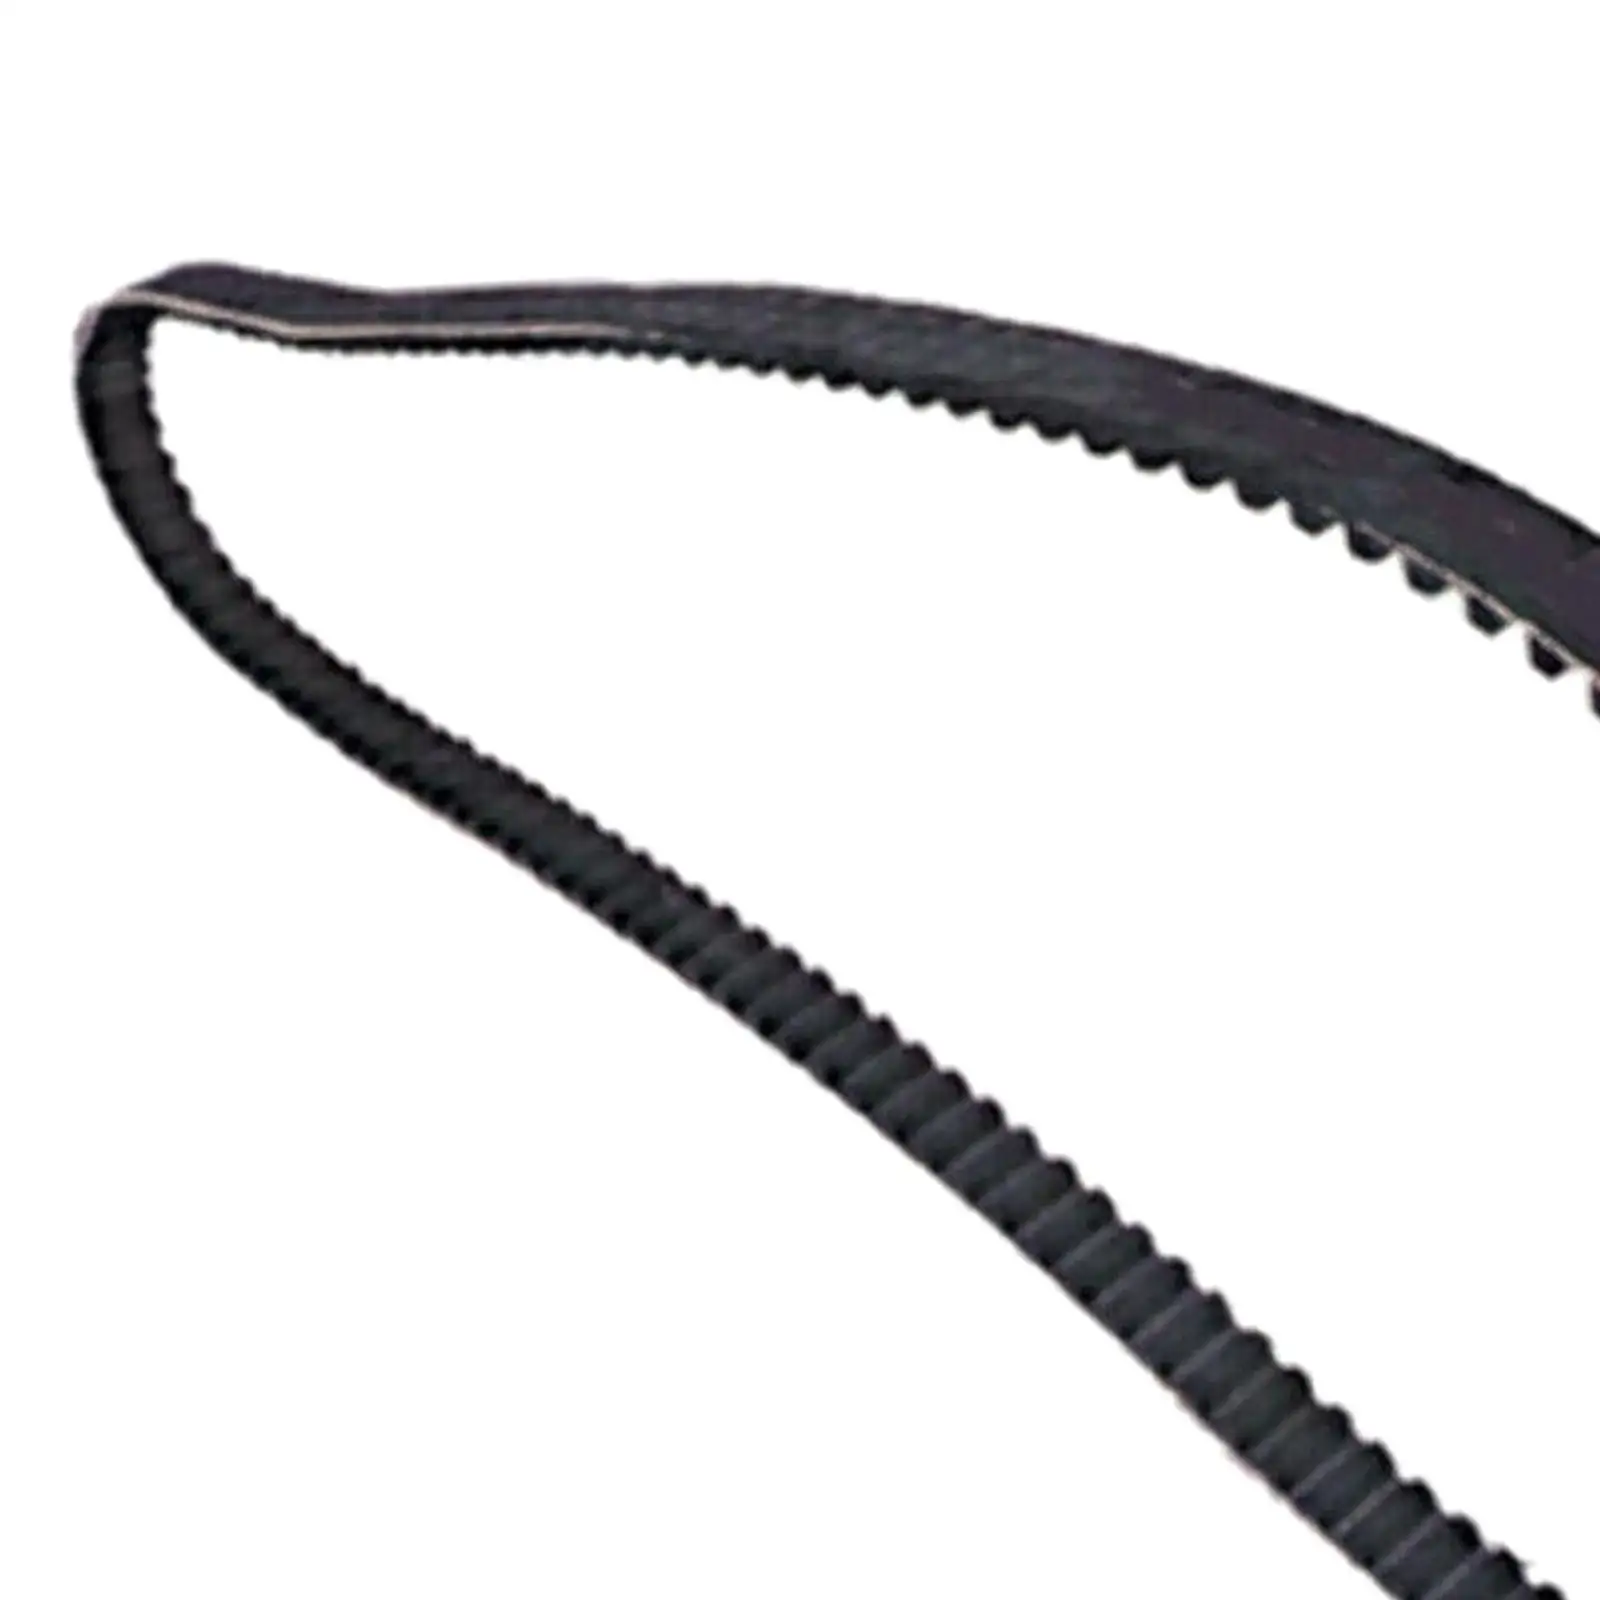 Rear Drive Belt 40015-00 133 Tooth 1 1/8